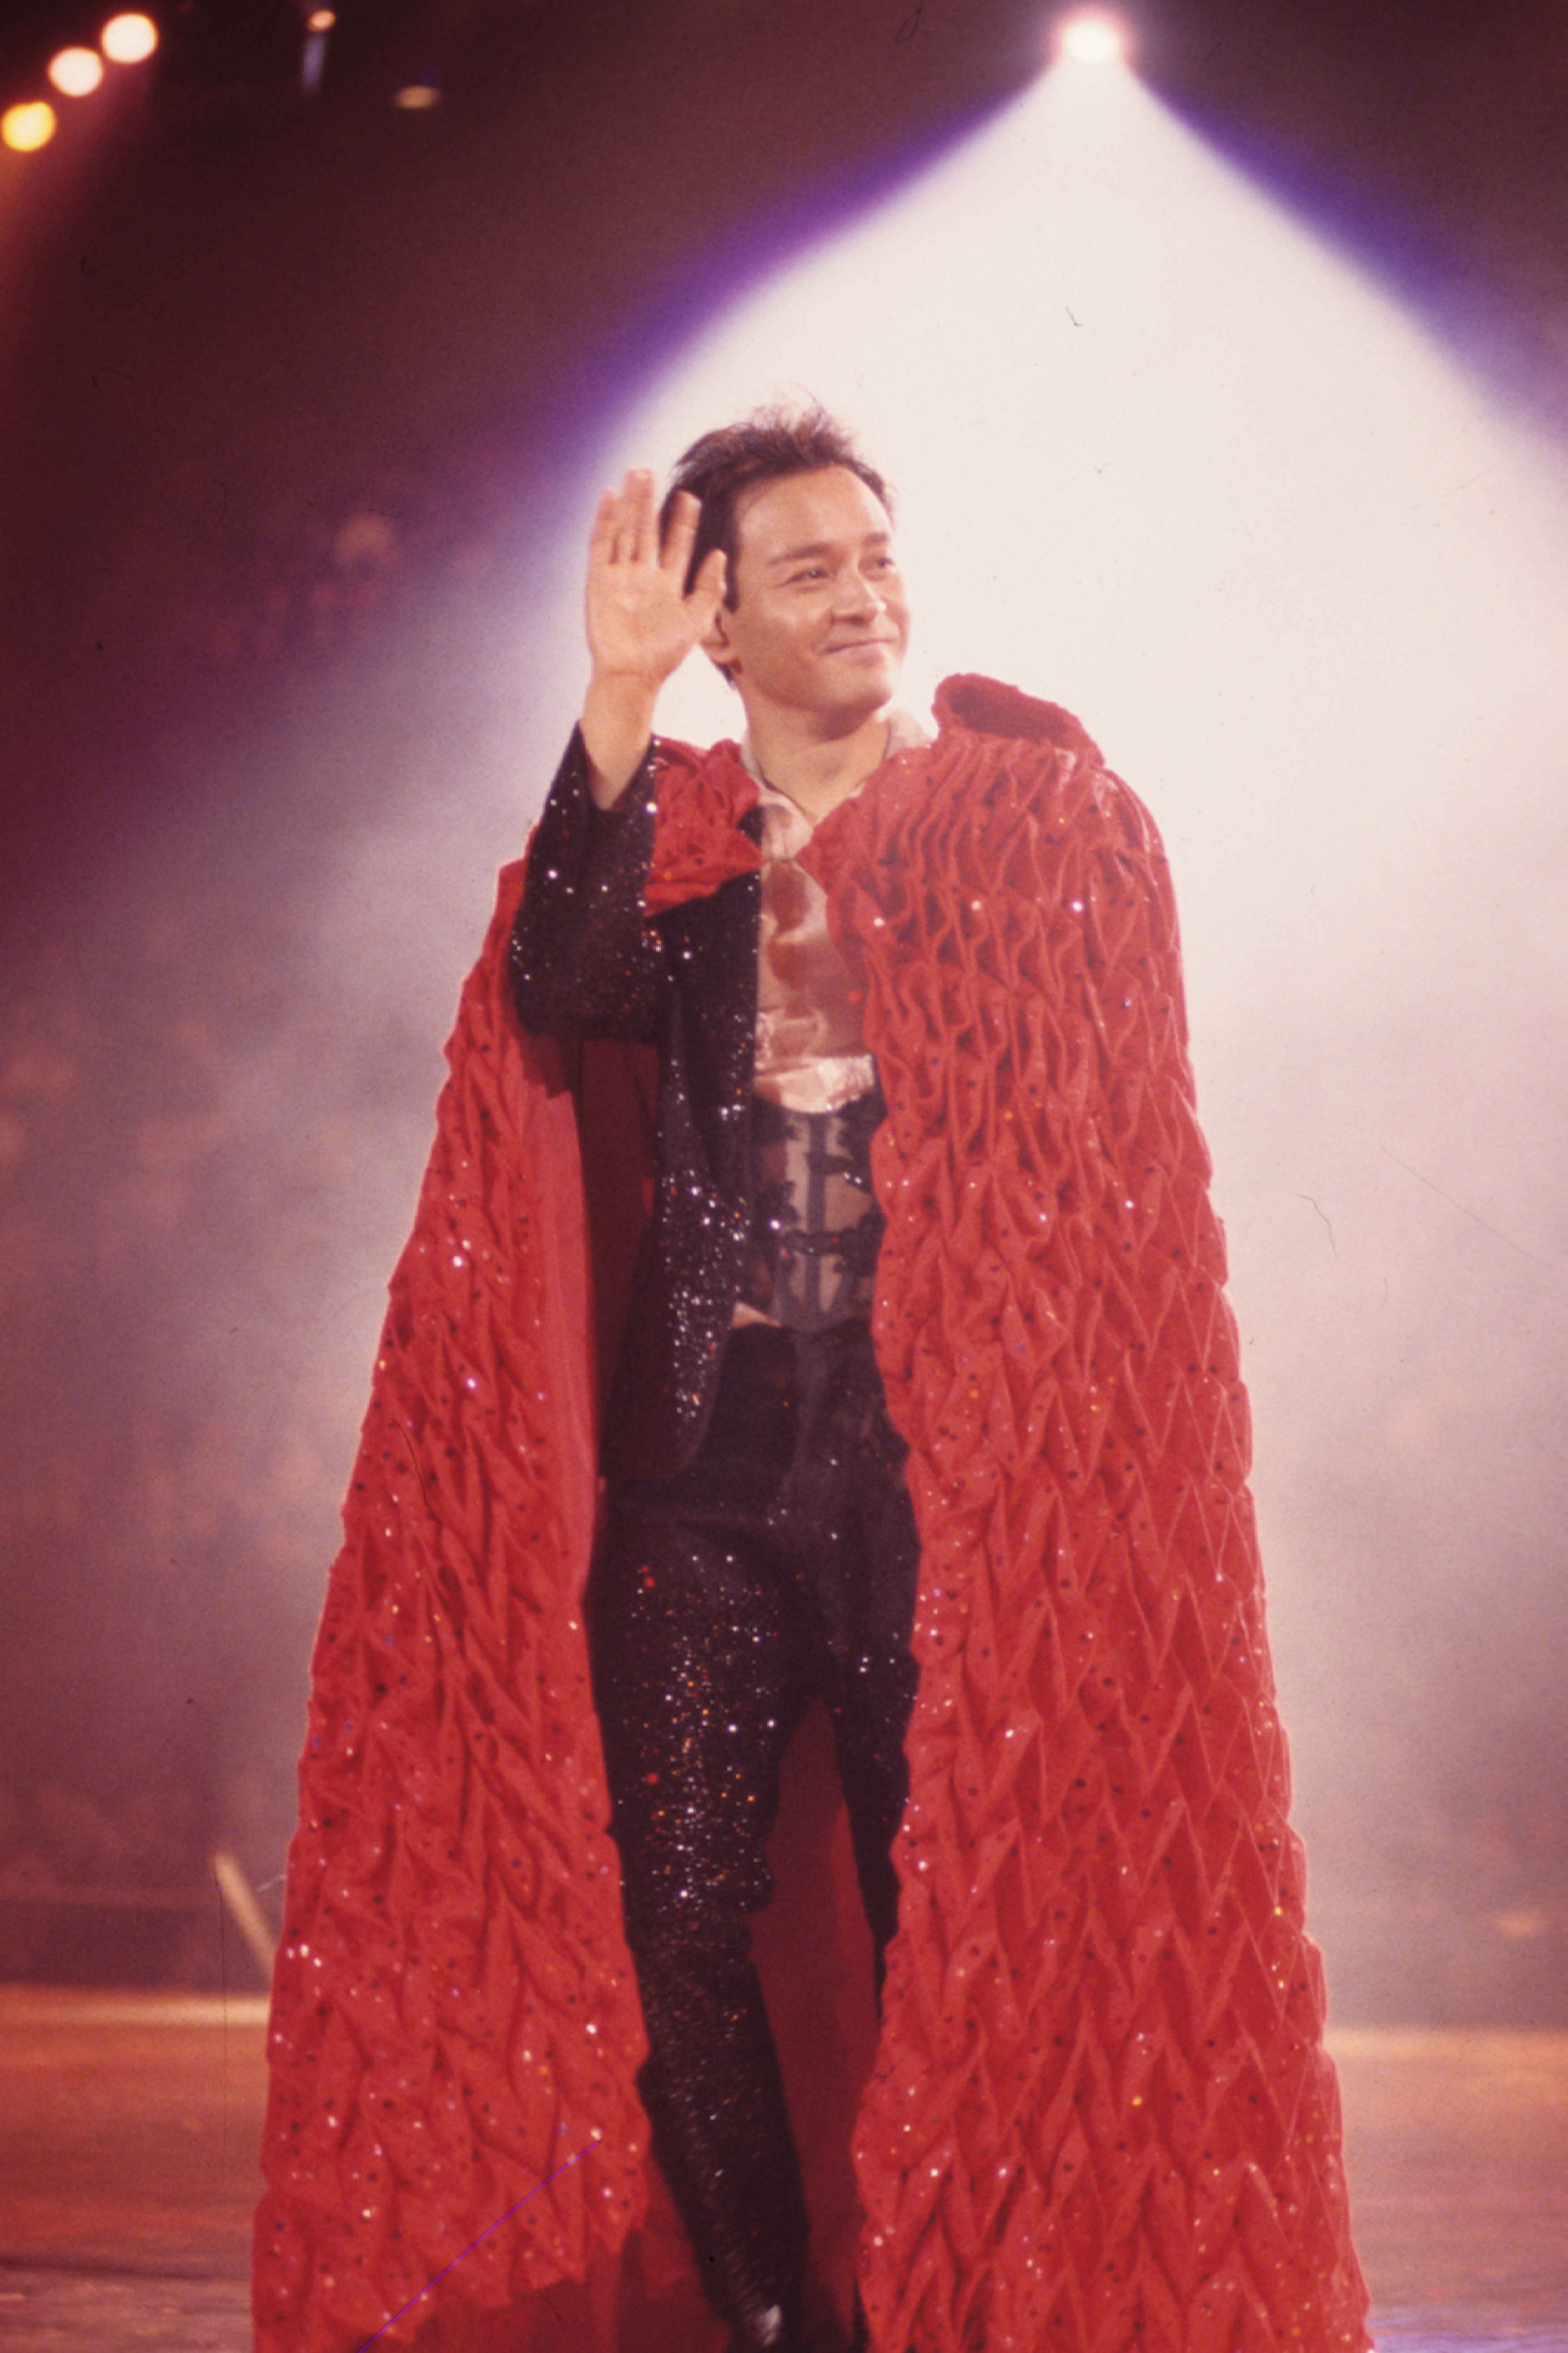 Red cloak and suit with stonework worn by Leslie Cheung when he performed Red and other songs in Live in Concert 97.